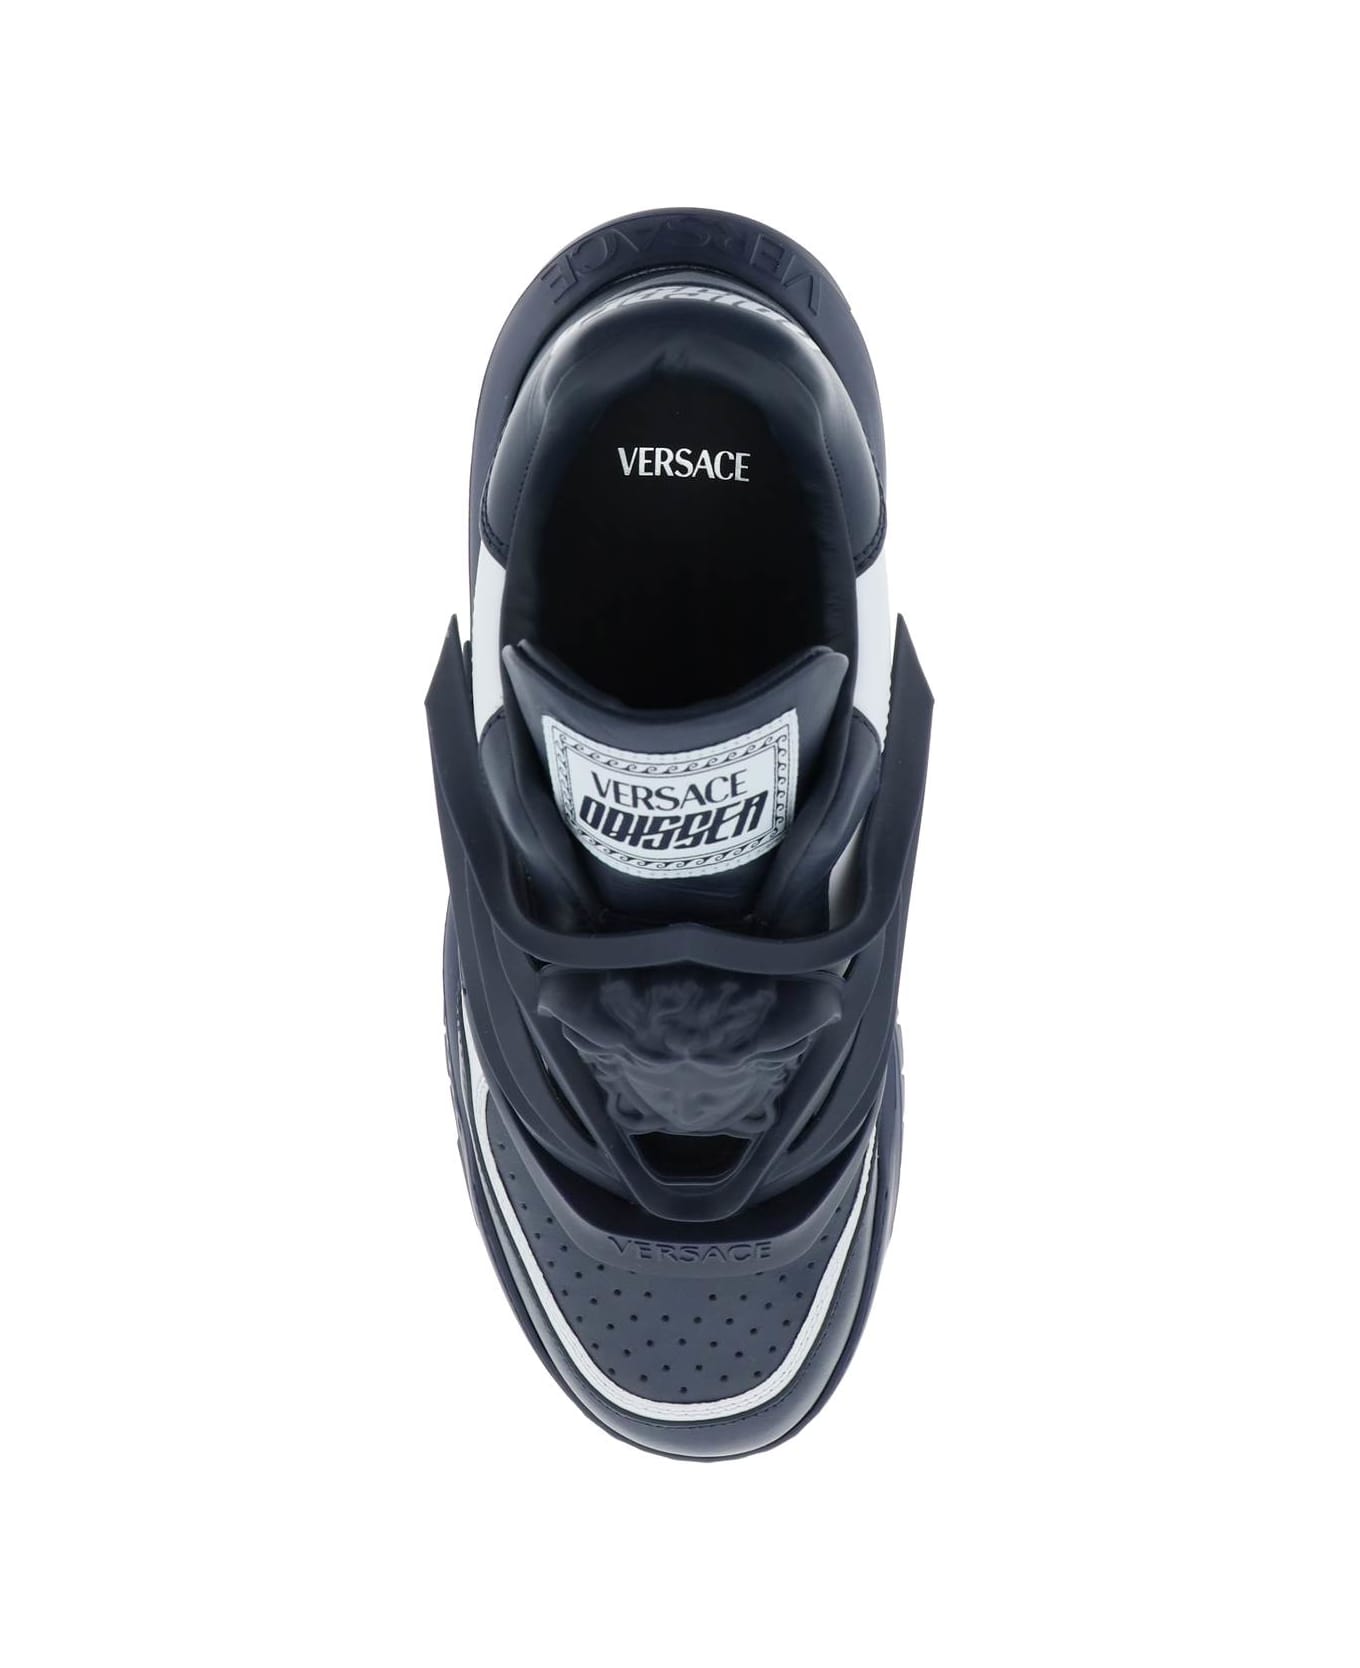 Versace Odissea Sneakers - BLUE NIGHT  WHITE (White)